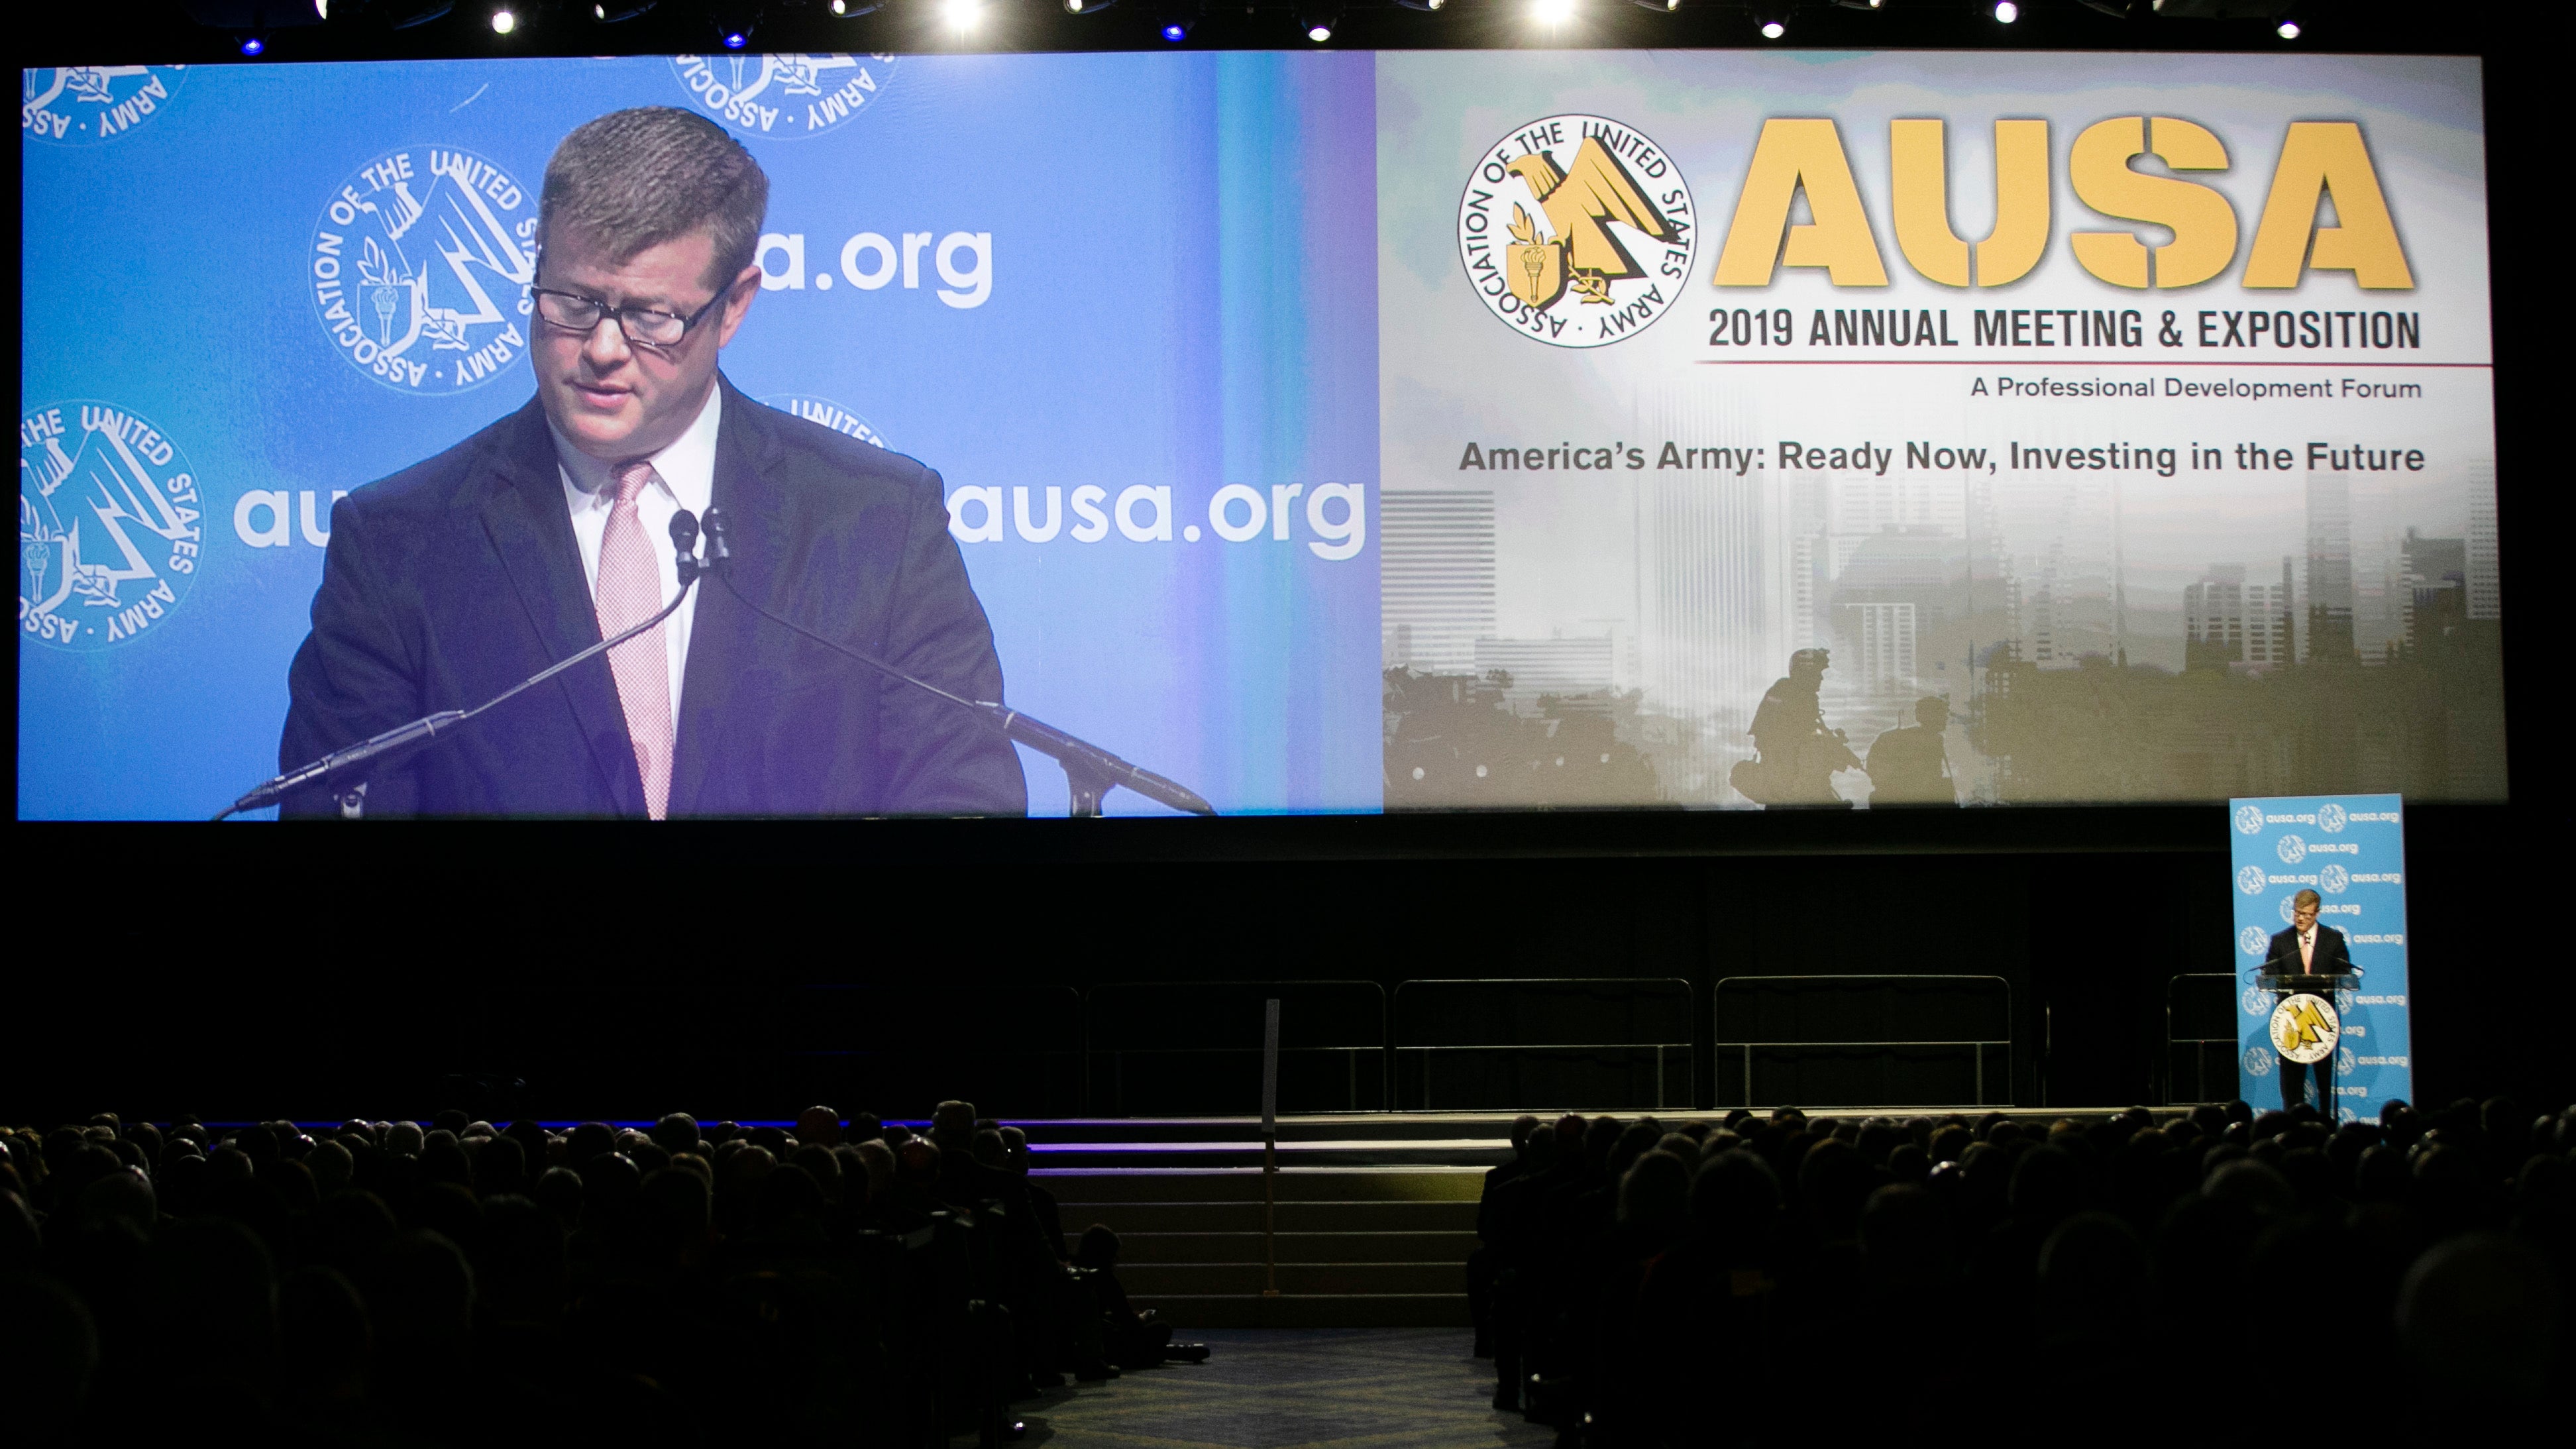 Secretary of the Army Hon. Ryan D. McCarthy addresses the opening ceremony of the 2019 AUSA Annual Meting and Exposition at the Washington Convention Center on Oct. 14, 2019.